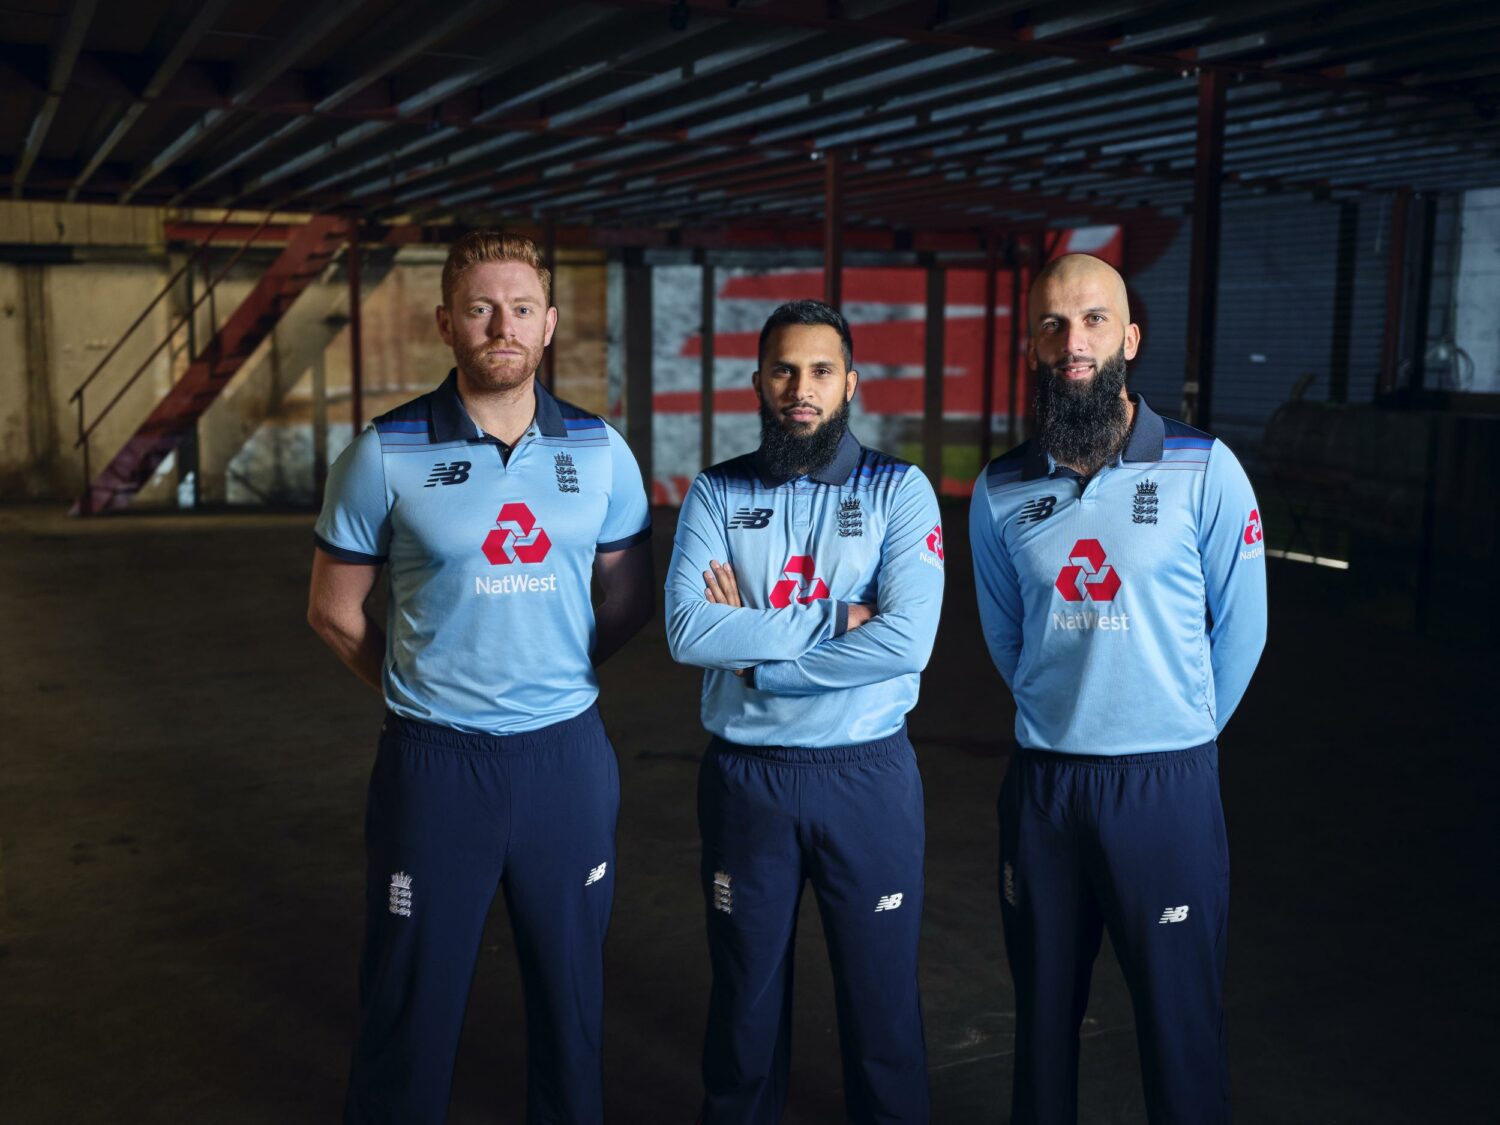 England Cricket Team 15 Member Squad For World Cup 2019 ...